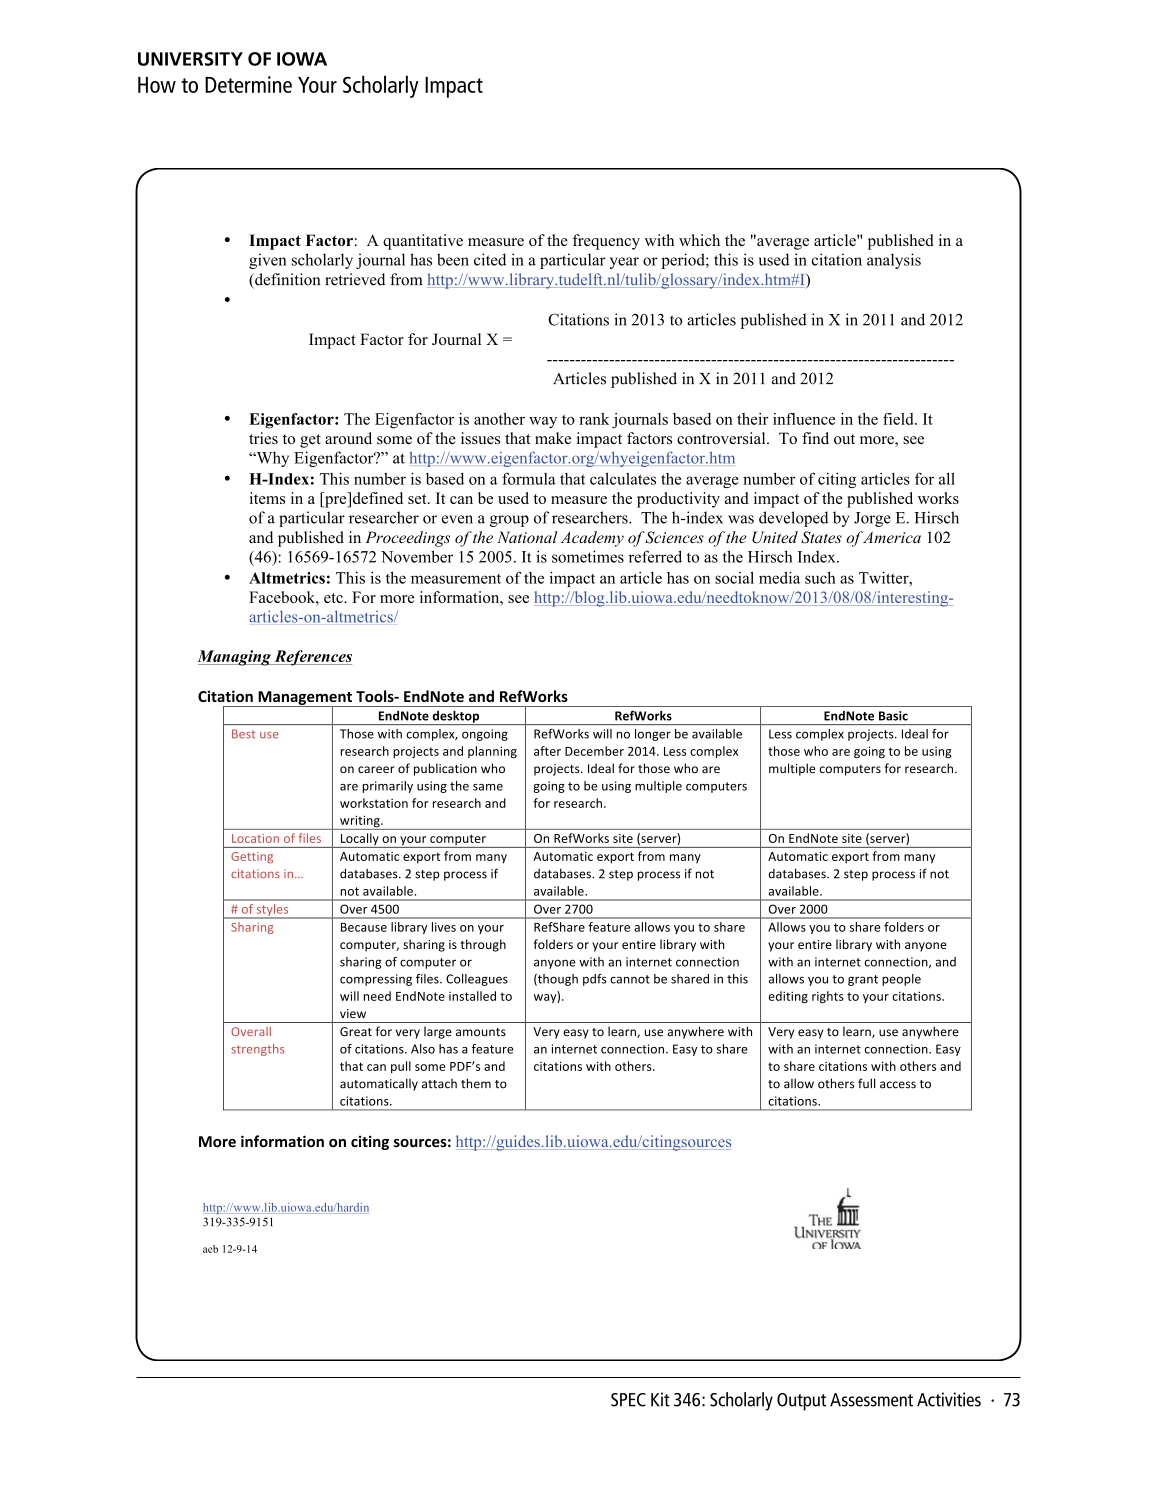 SPEC Kit 346: Scholarly Output Assessment Activities (May 2015) page 73